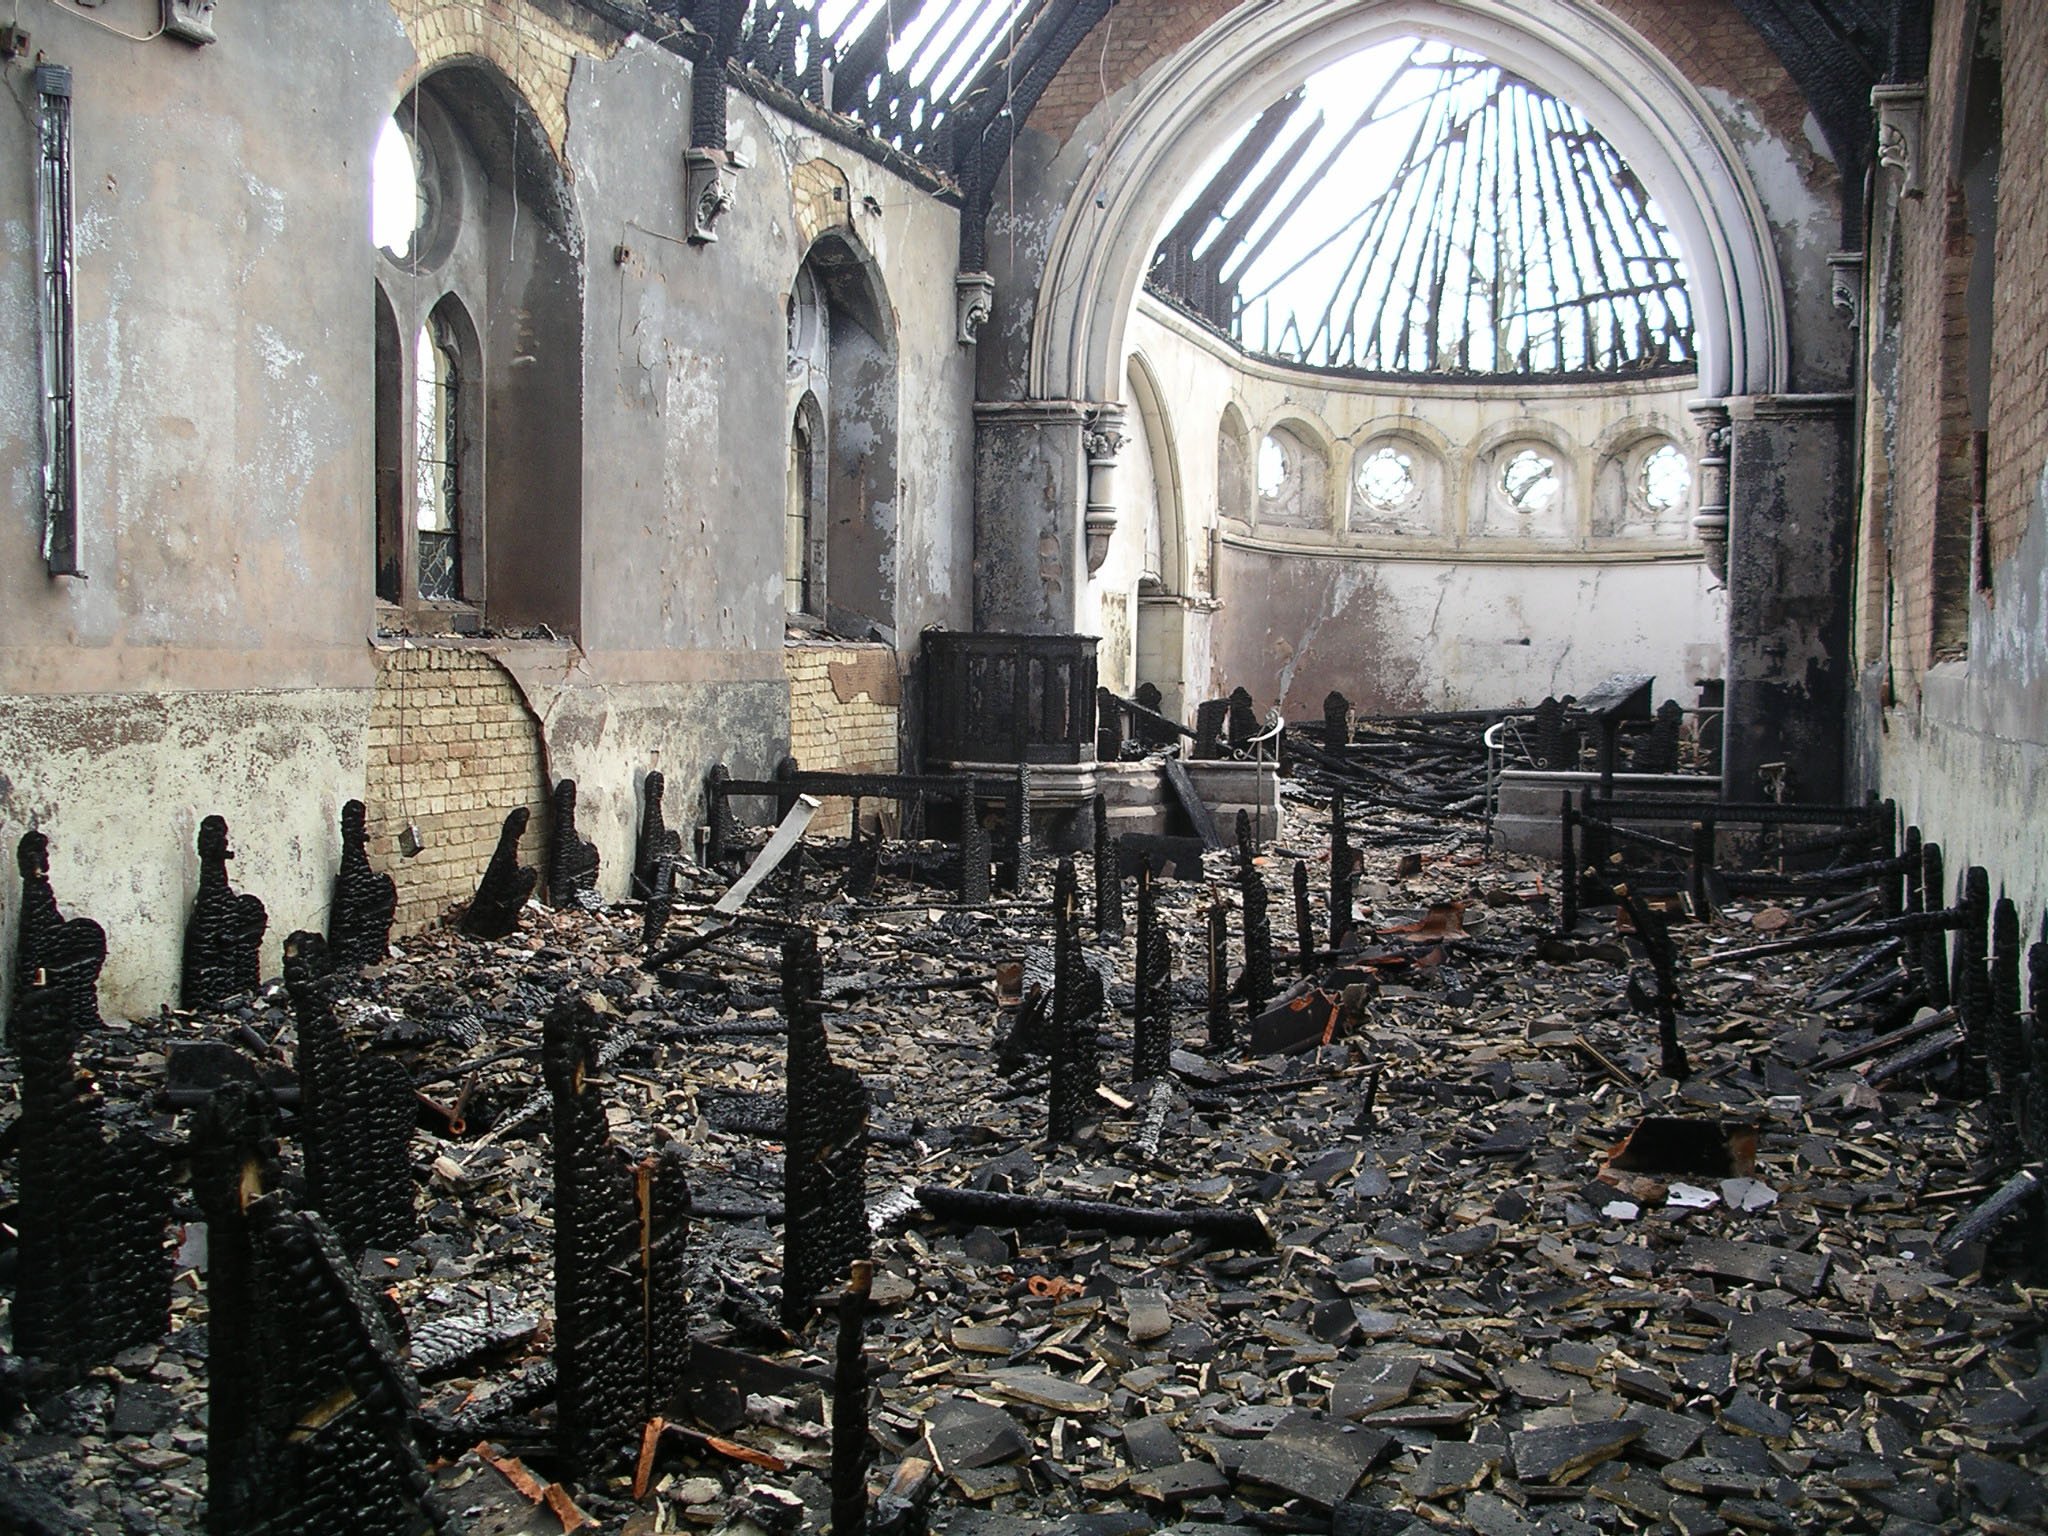 Burnt out interior of church